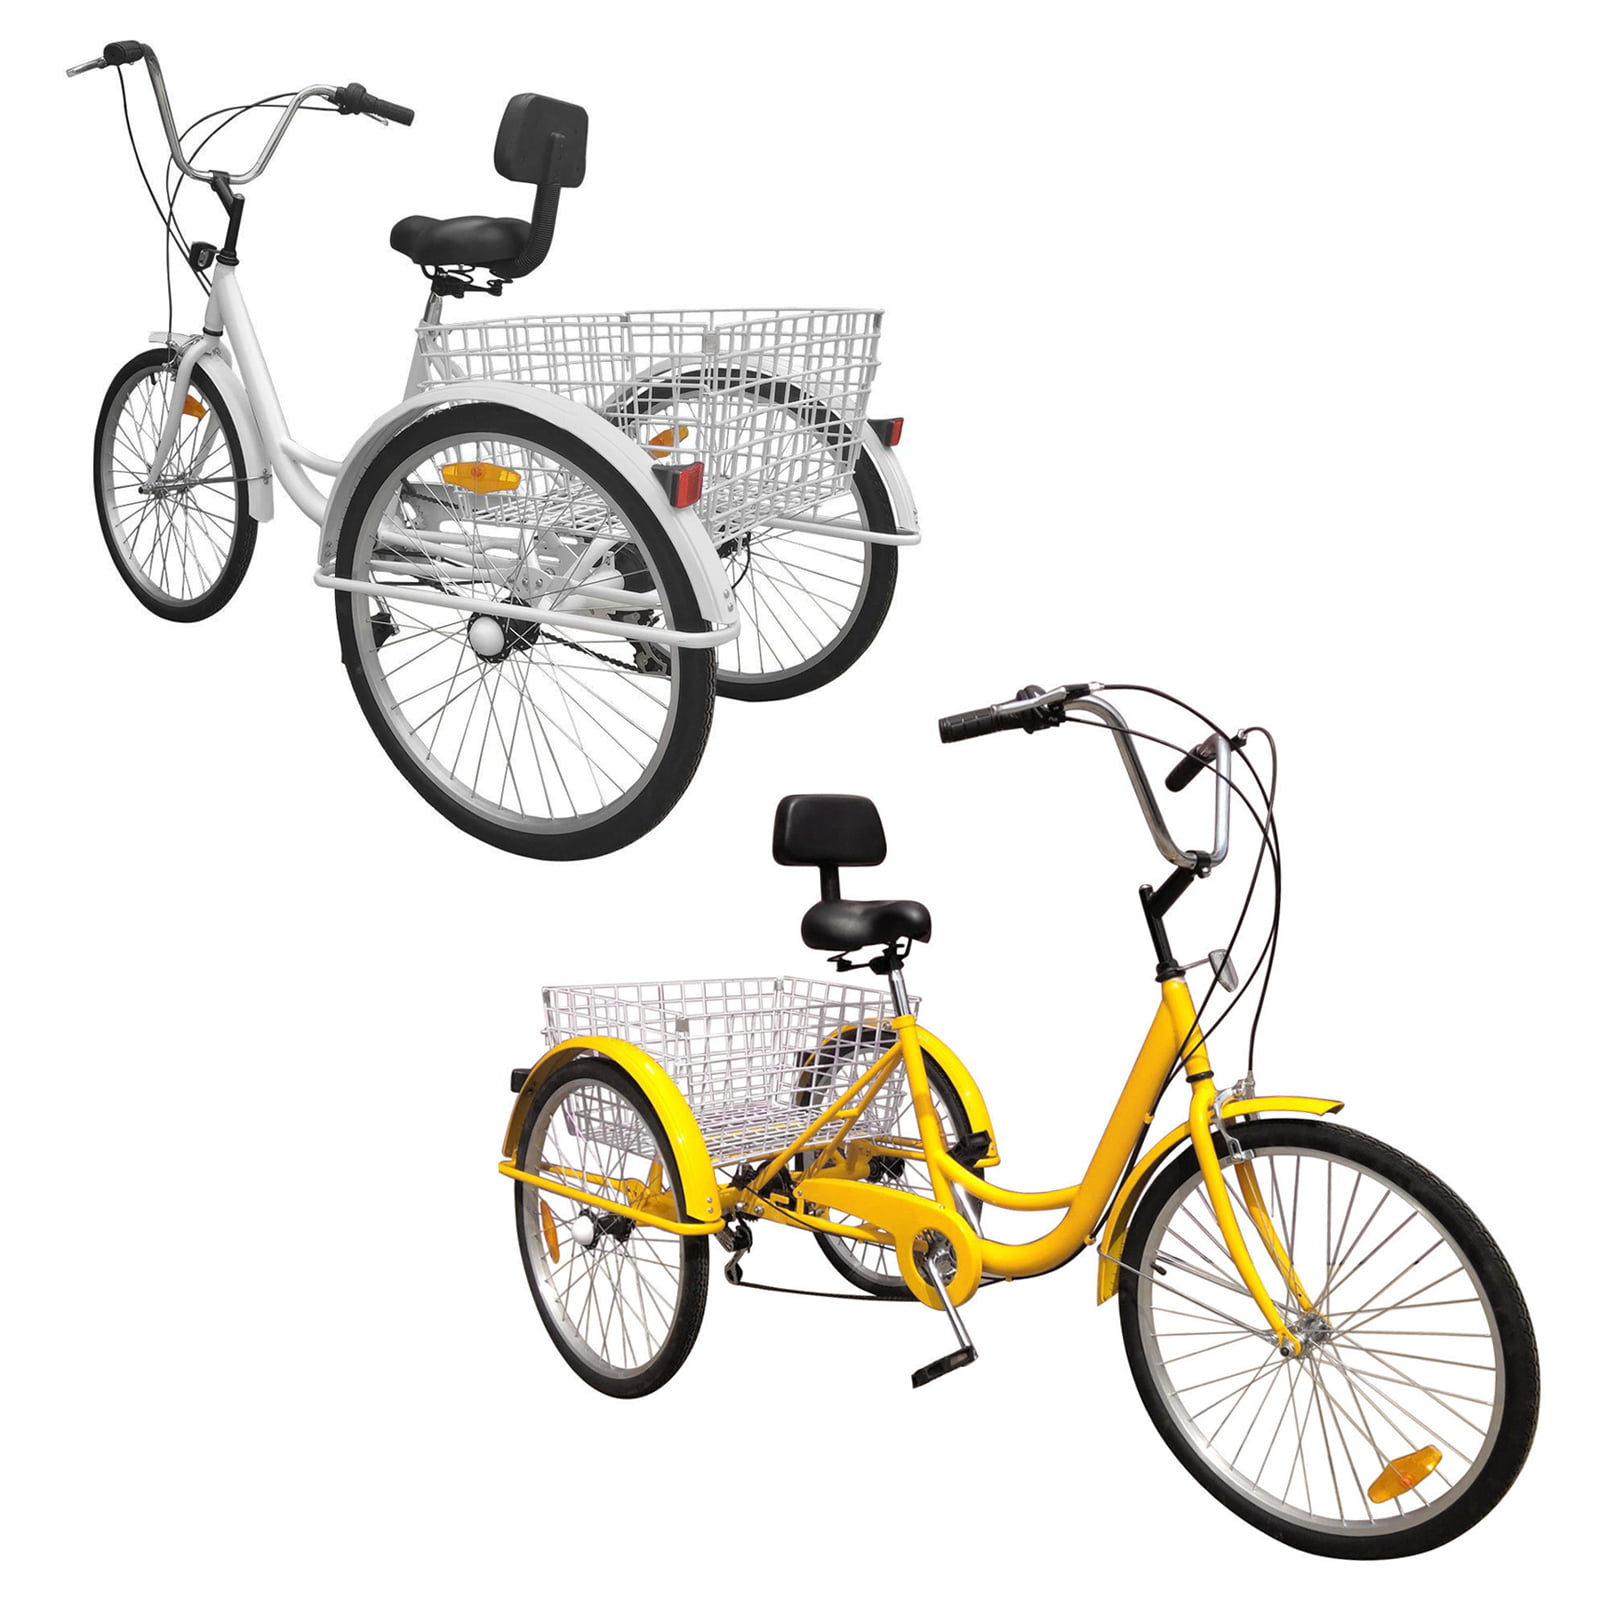 3Color 26" 7-Speed 3-Wheel Tricycle Trike Bicycle Cruise Basket Aluminum Frame 